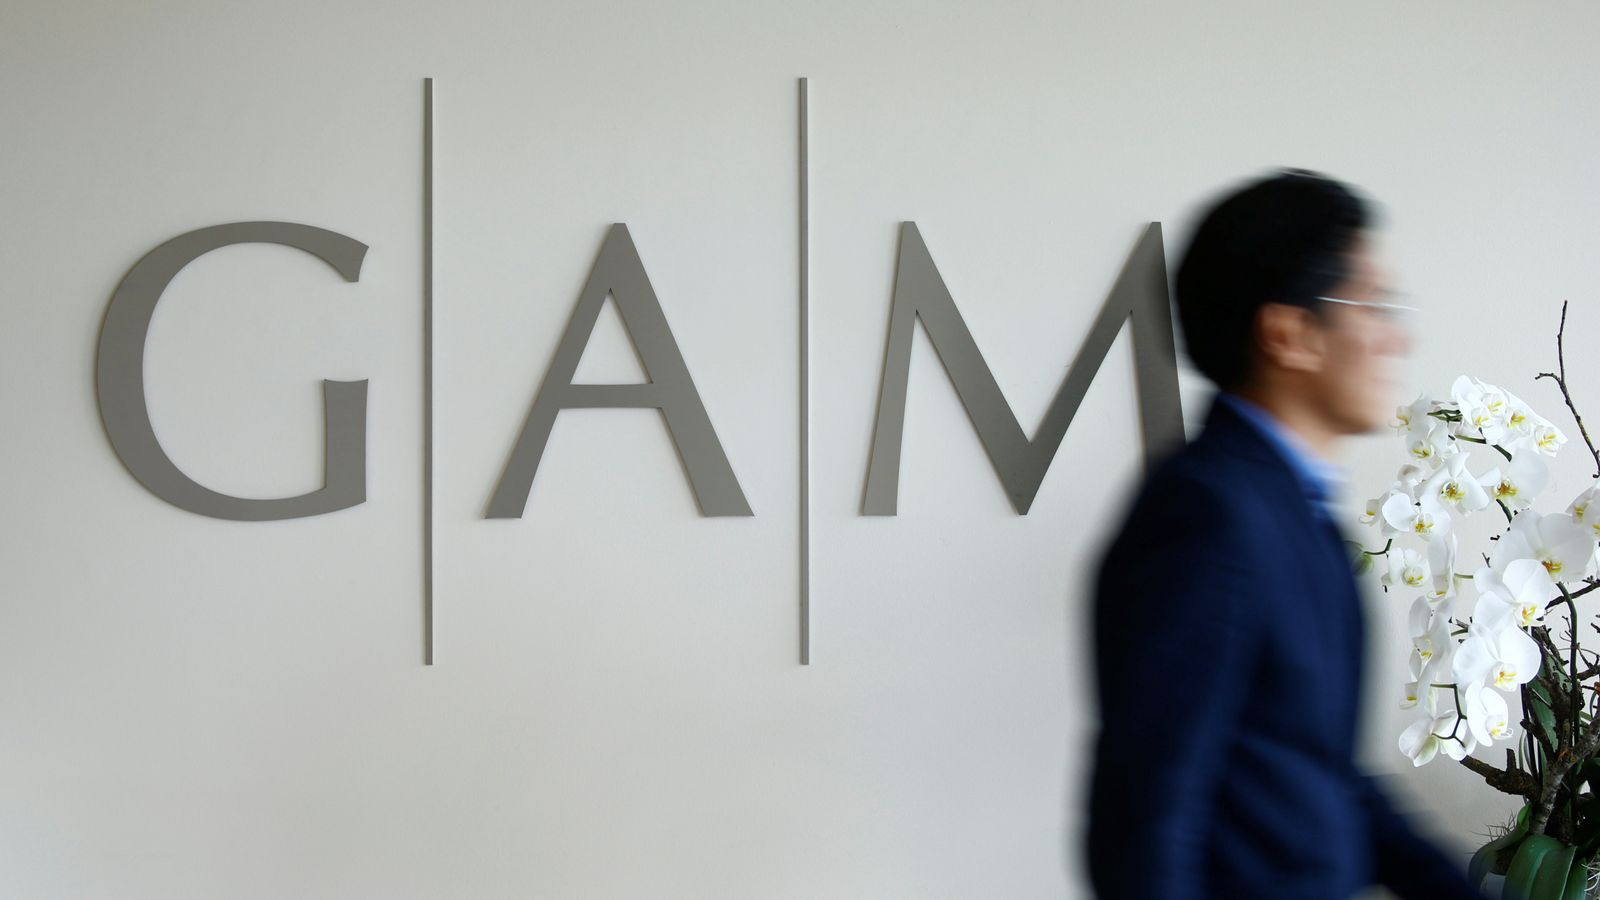 Swiss asset manager GAM hires bankers to explore sale